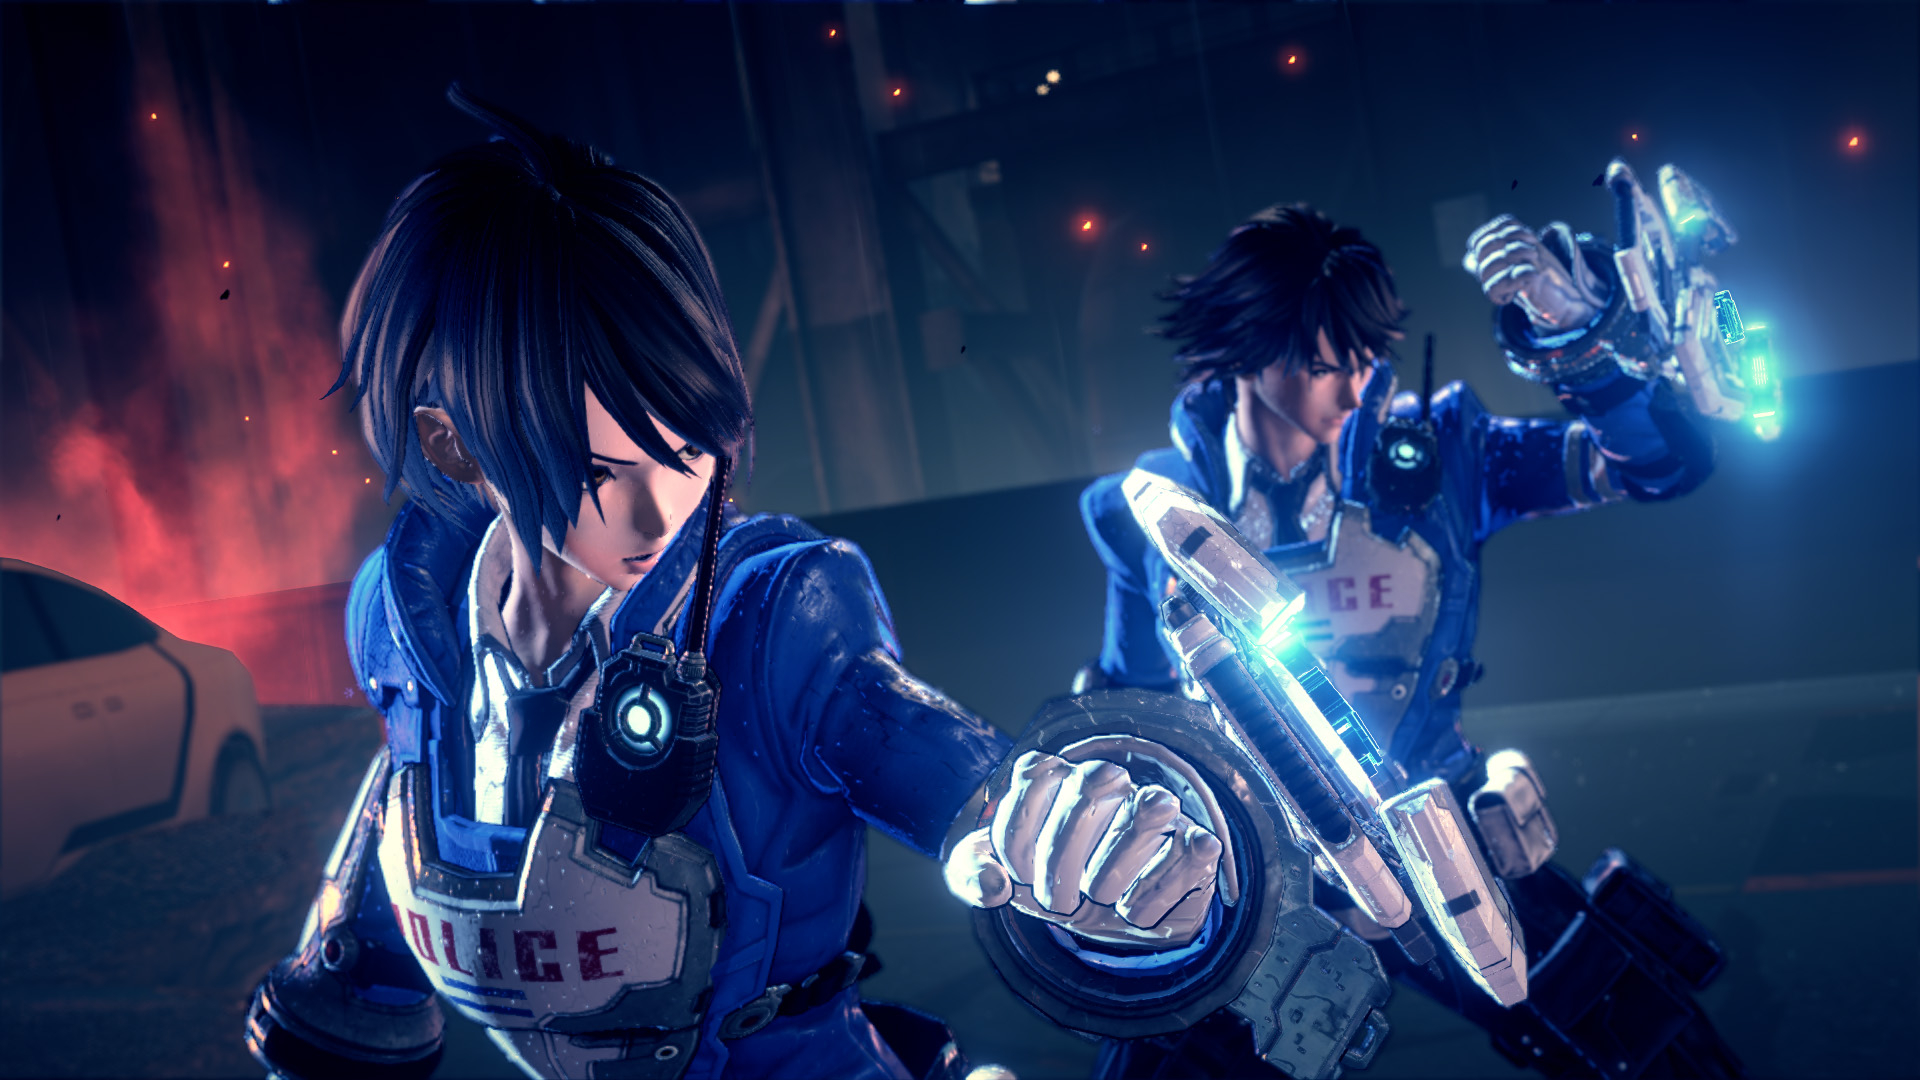 Astral Chain is the Next Switch Game from Platinum Games and Hideki